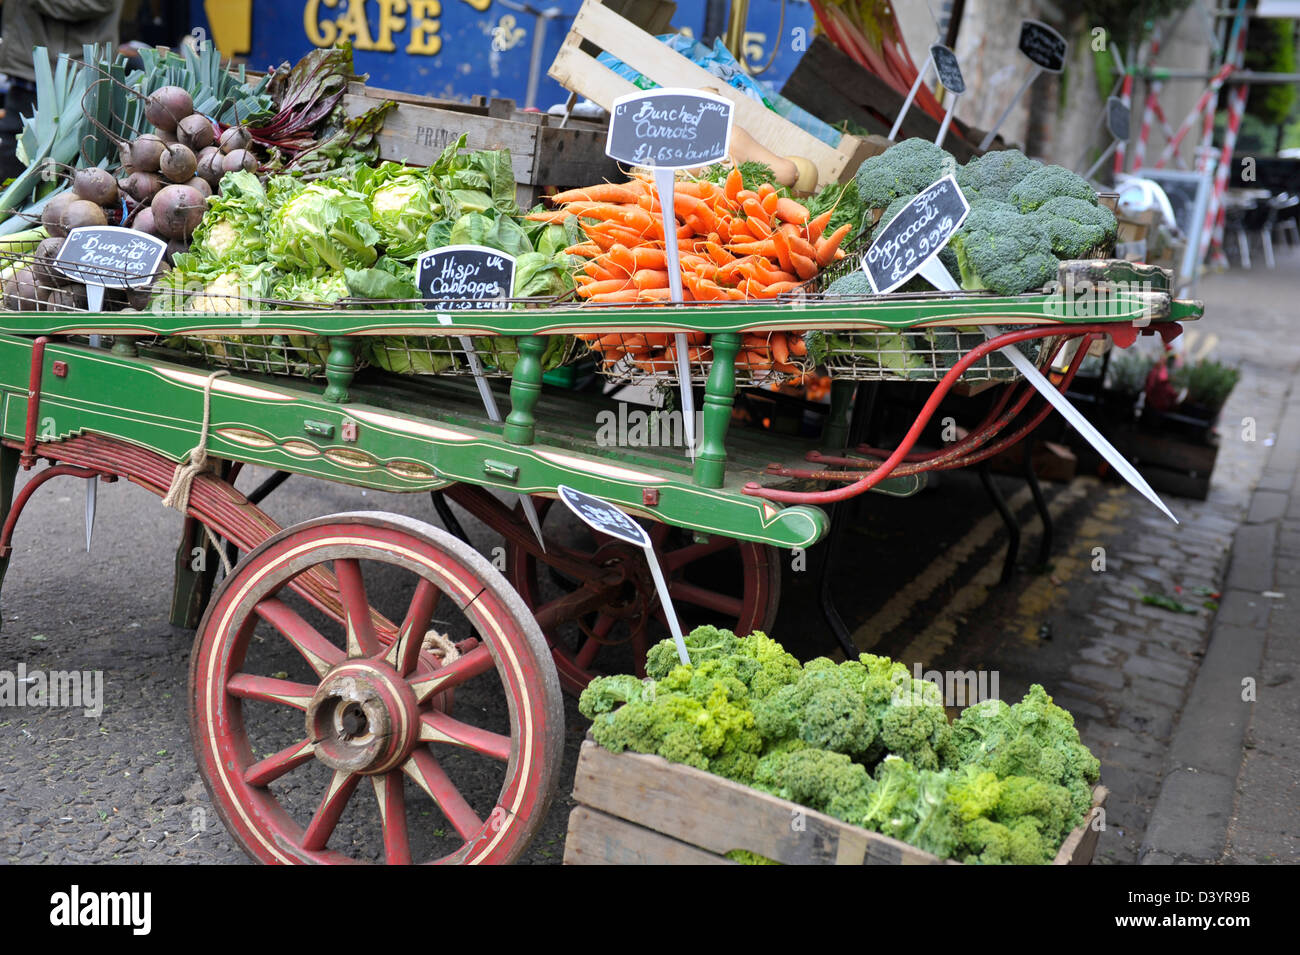 Old fashioned market cart with vegetables Stock Photo